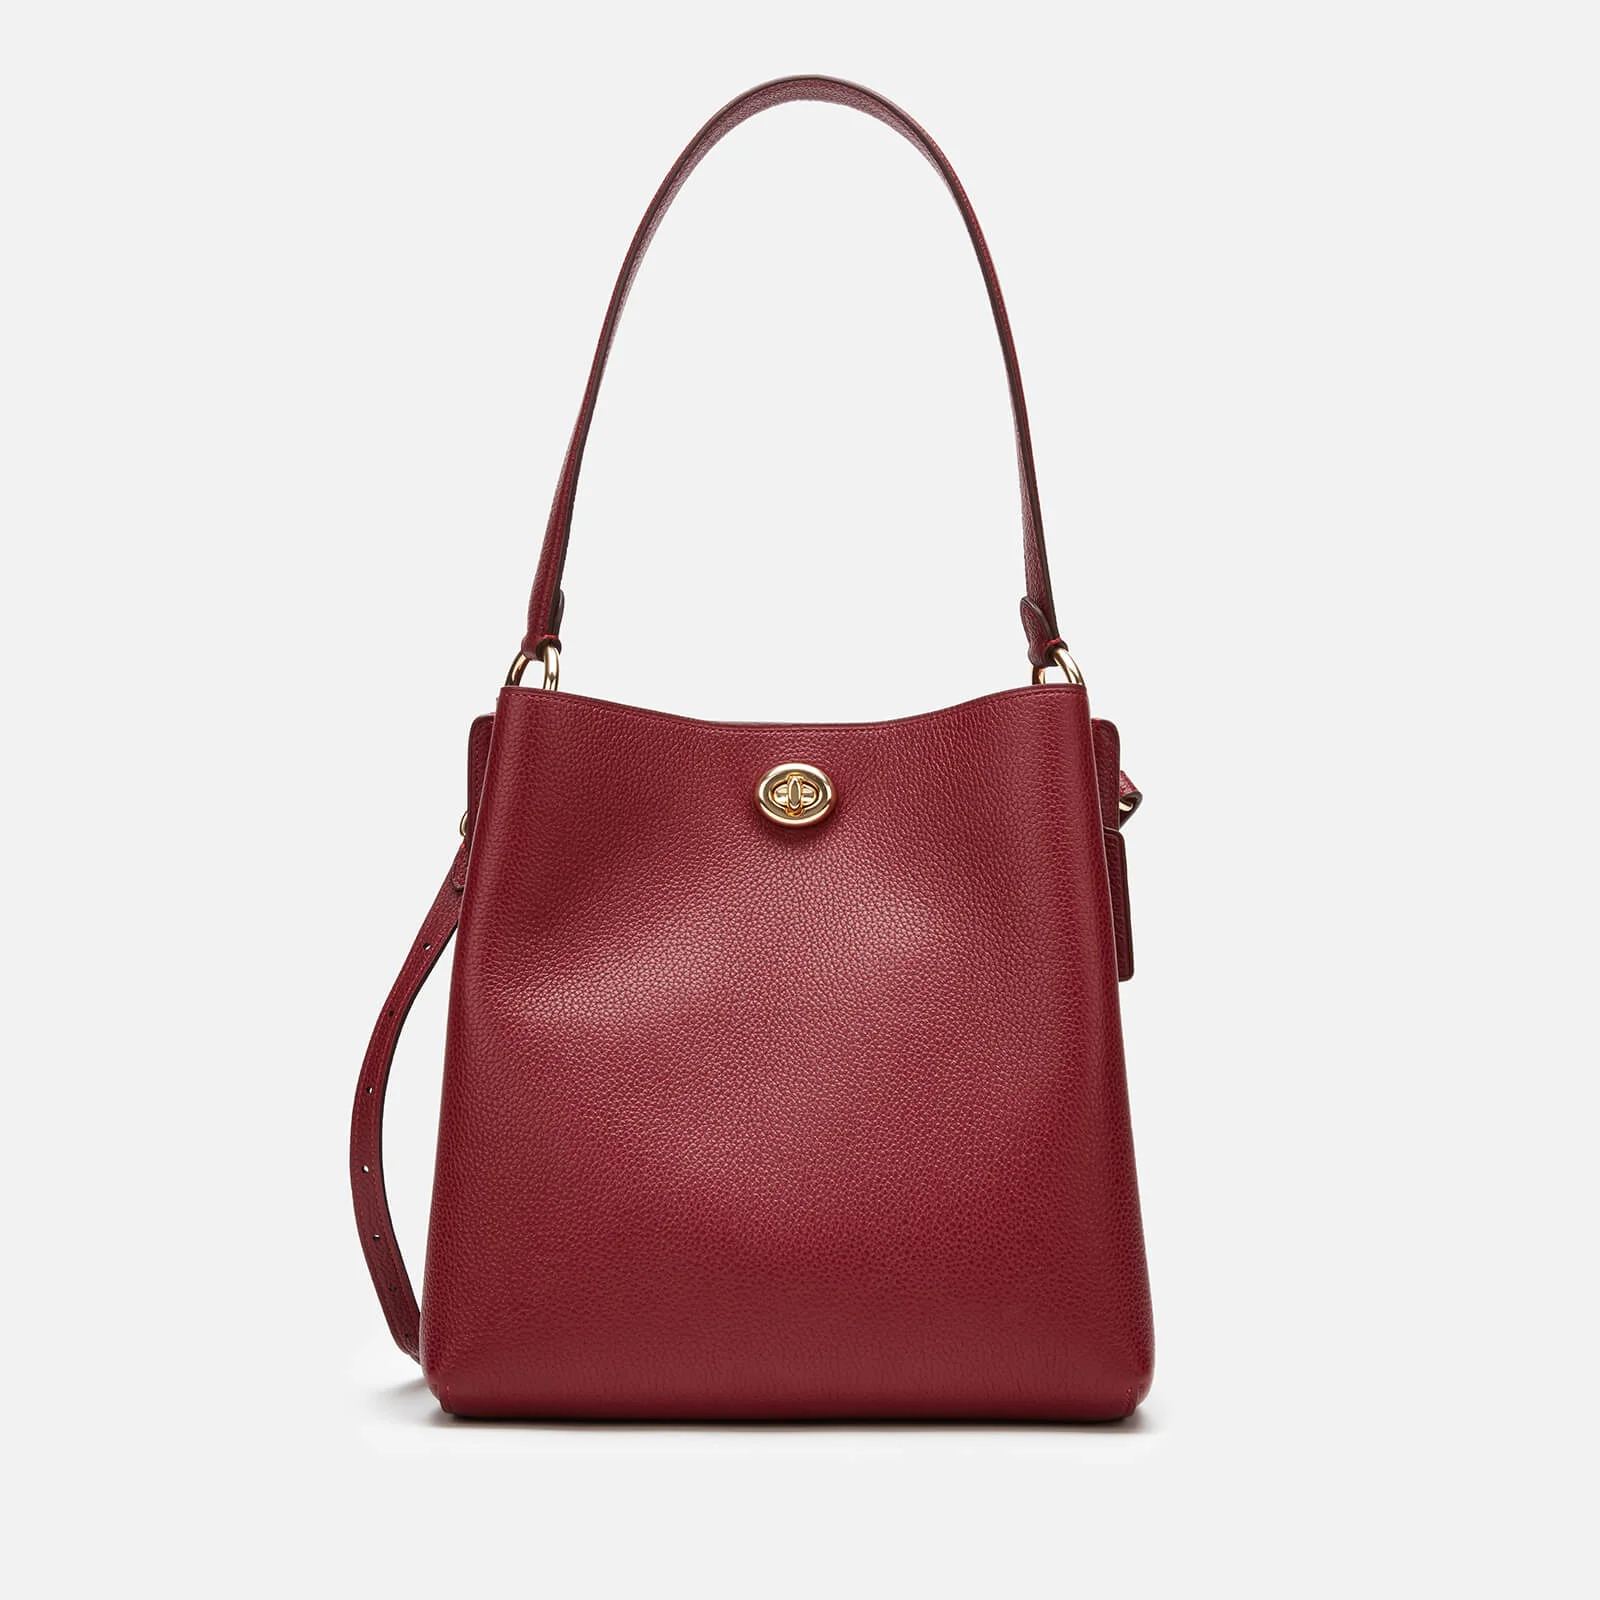 Coach Women's Polished Pebble Leather Charlie Bucket - Deep Red Image 1